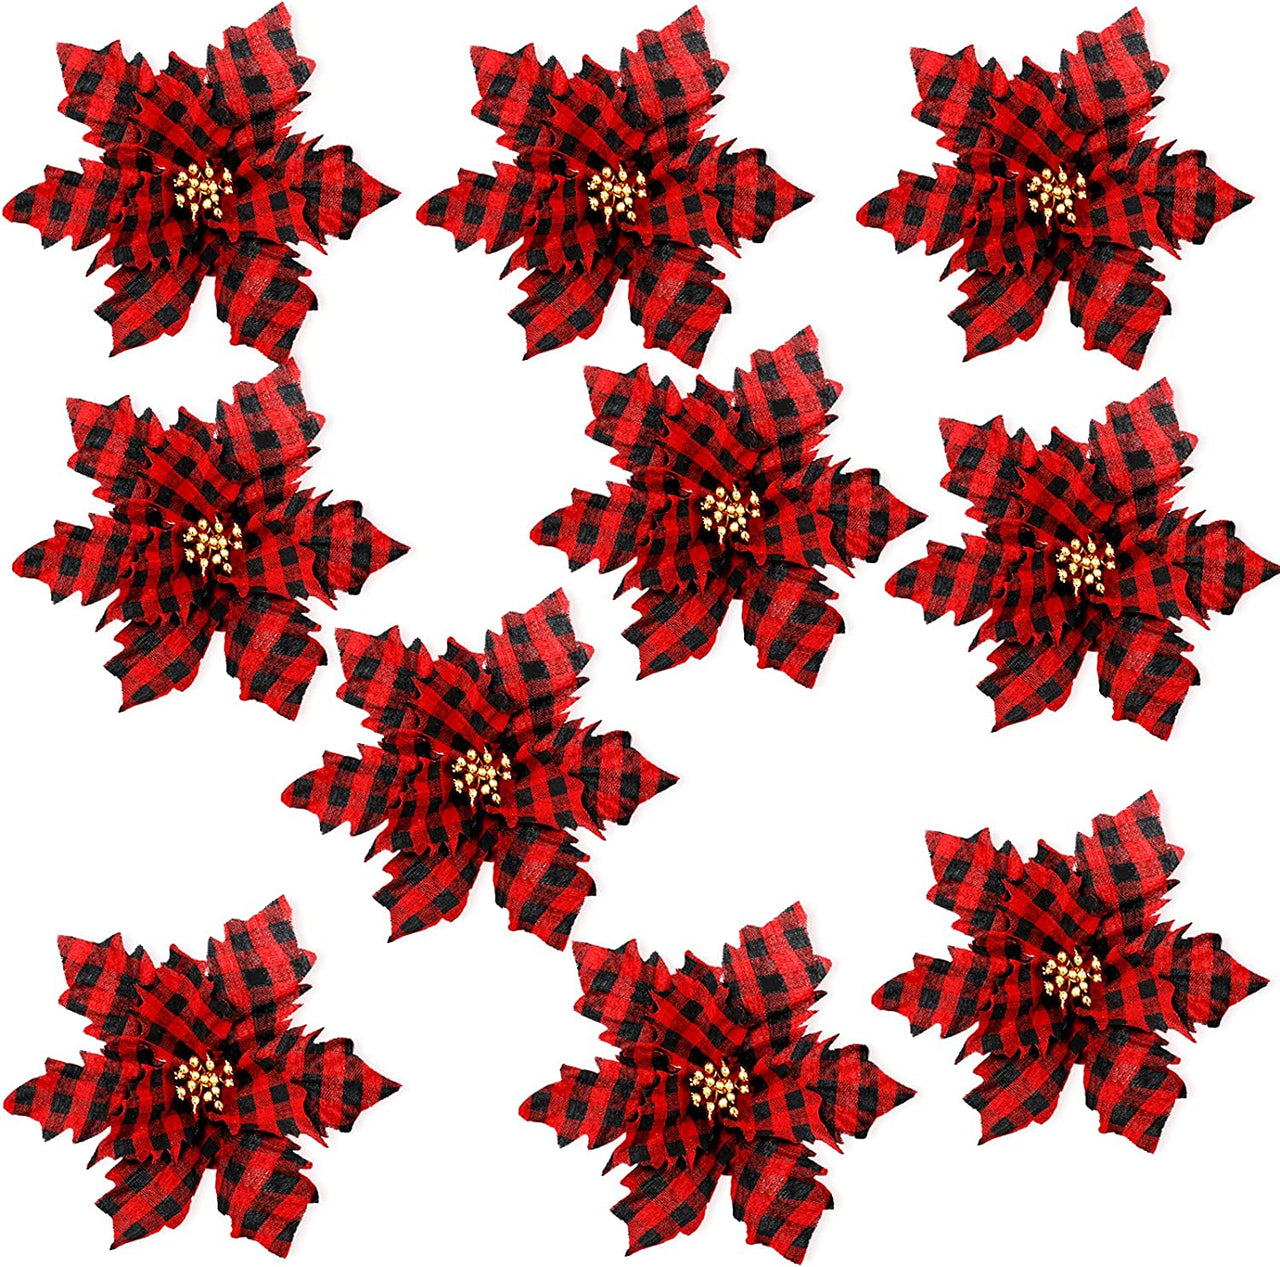 10 Pieces Buffalo Plaid Poinsettias Artificial Christmas Flowers Christmas Tree Ornaments for Christmas Tree Wreaths Wedding Garland Holiday Decorations, 5.9 Inch (Red and Black)